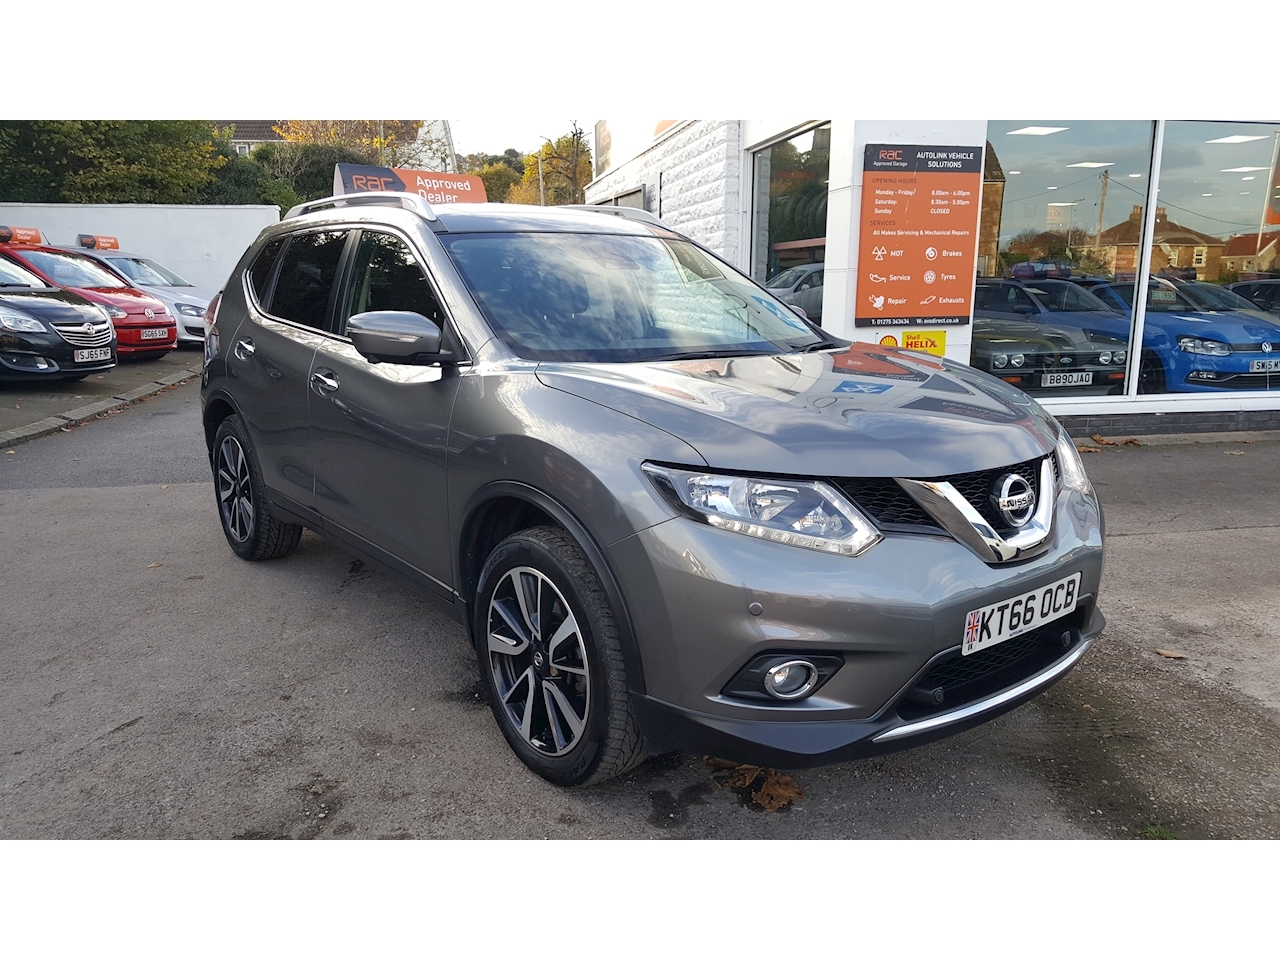 X-Trail 1.6 dCi N-Vision SUV 5dr Diesel (s/s) (130 ps)